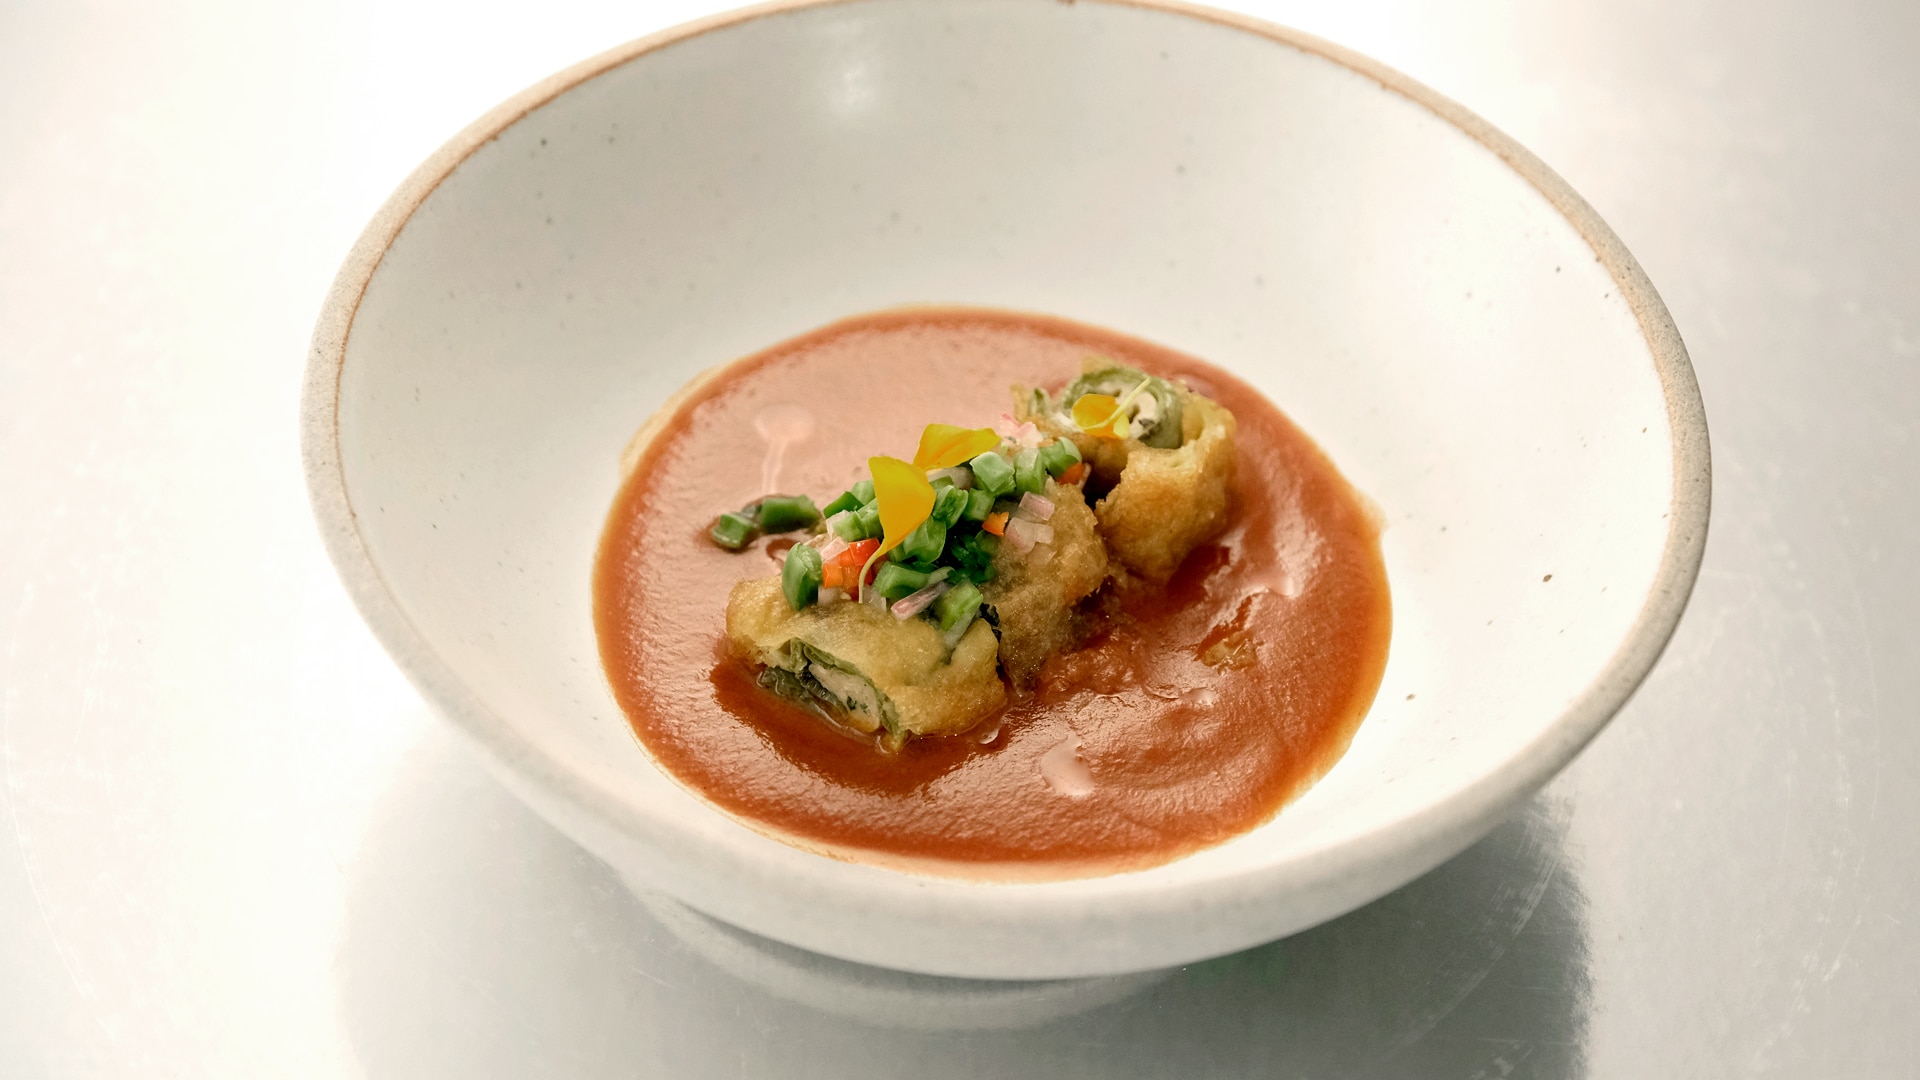 This Unique Nopal Relleno Is the "Perfect Dish for the Home Chef to Make"